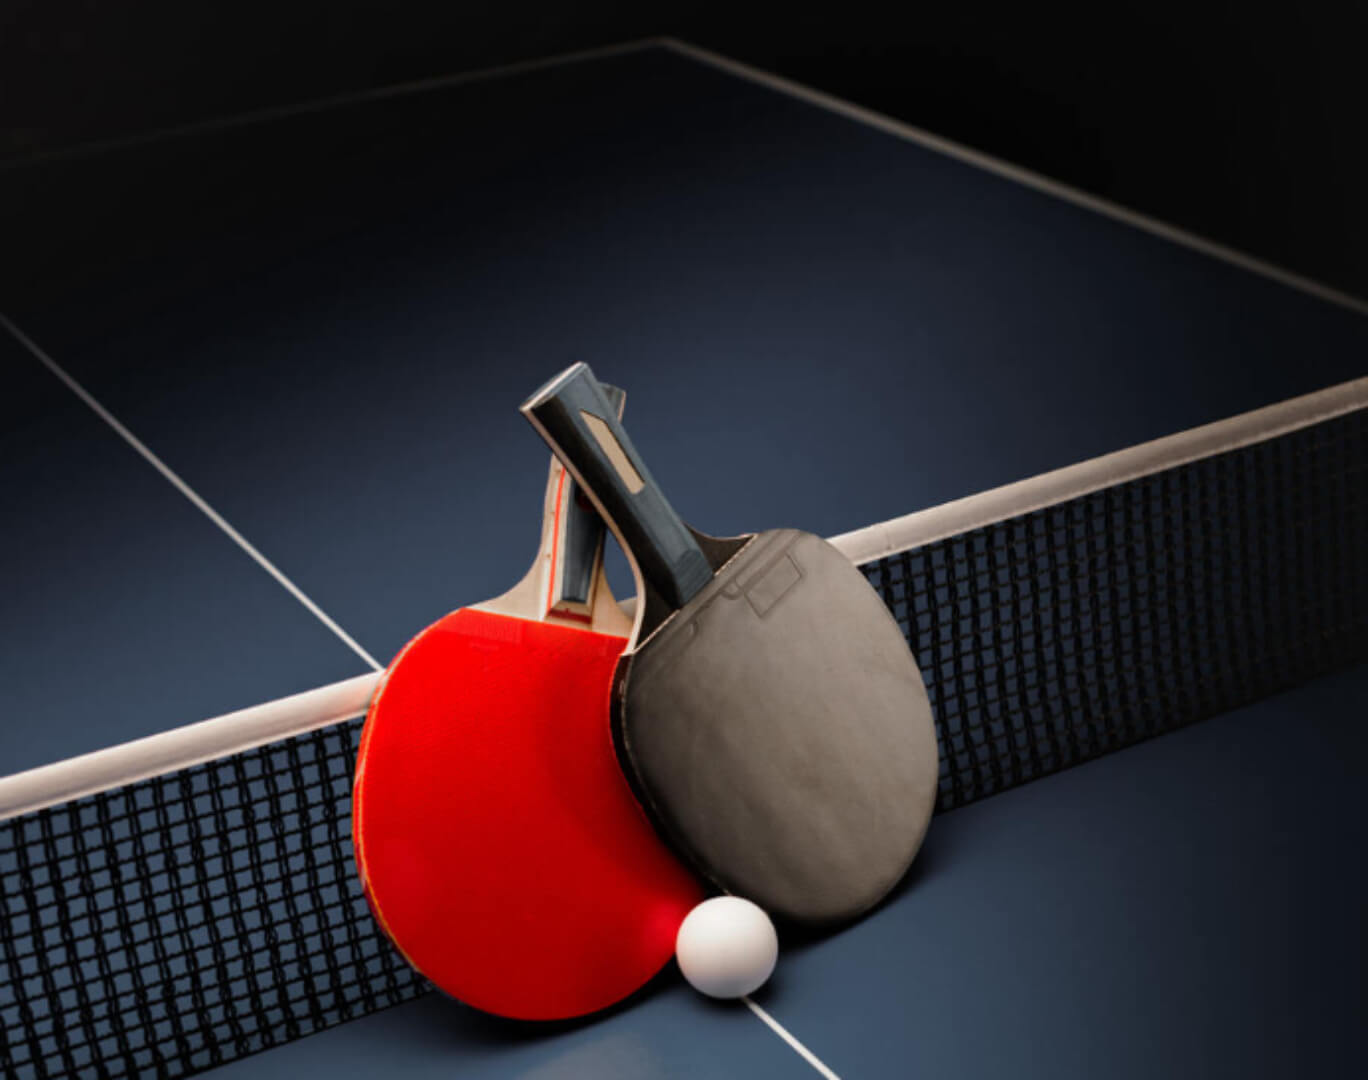 Ping Pong all'aperto